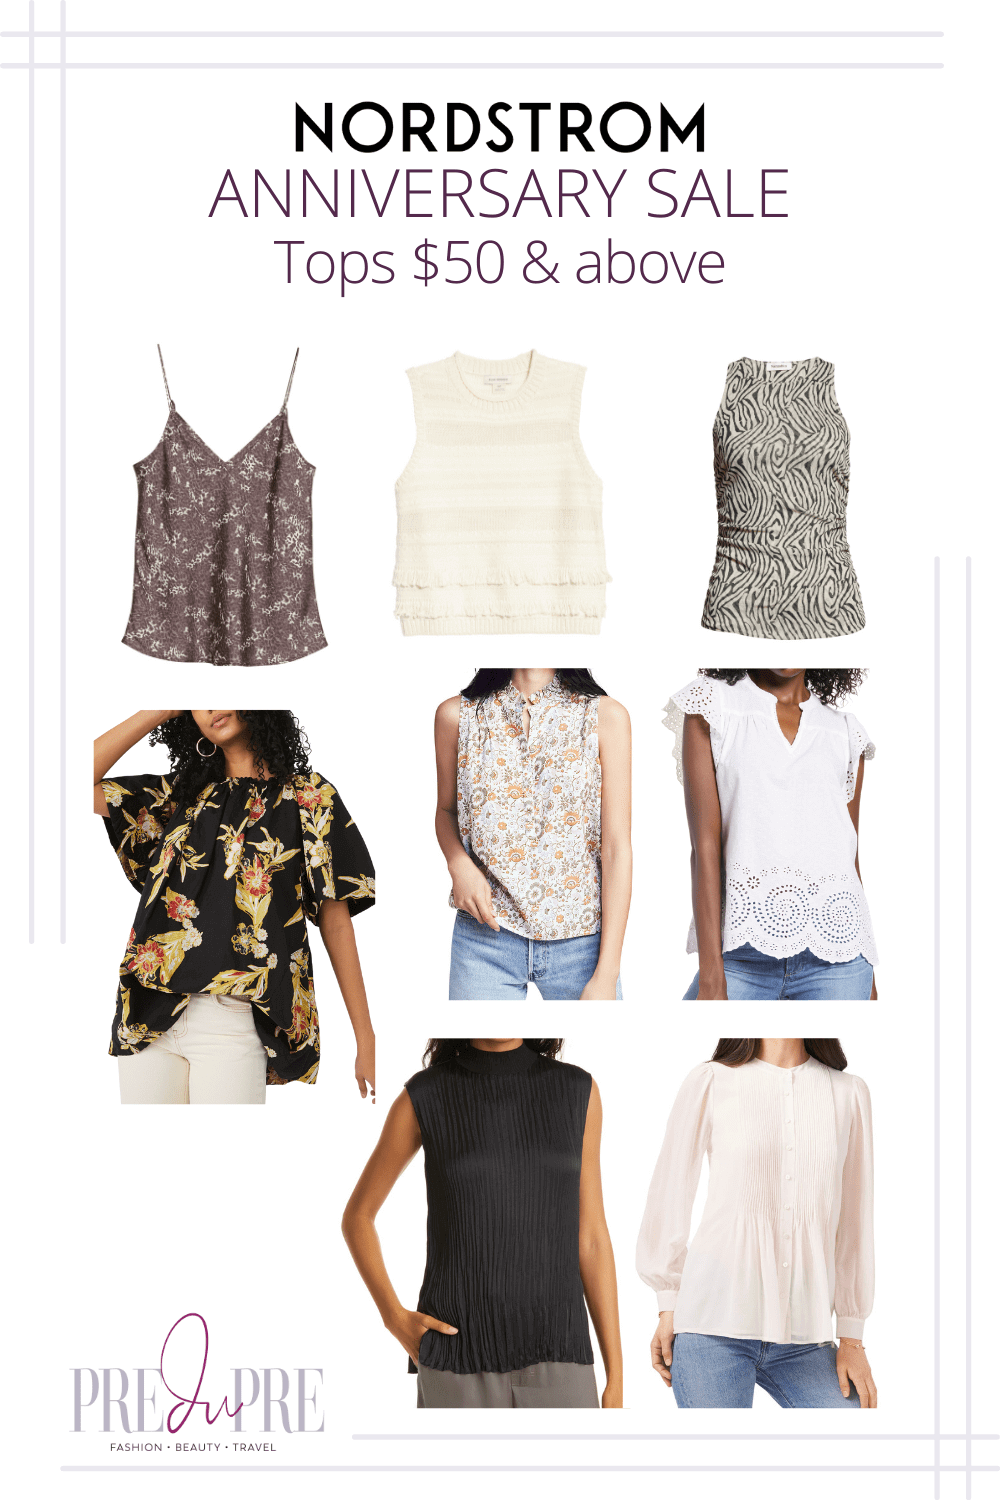 Nordstrom Anniversary Sale Tops $50 and above